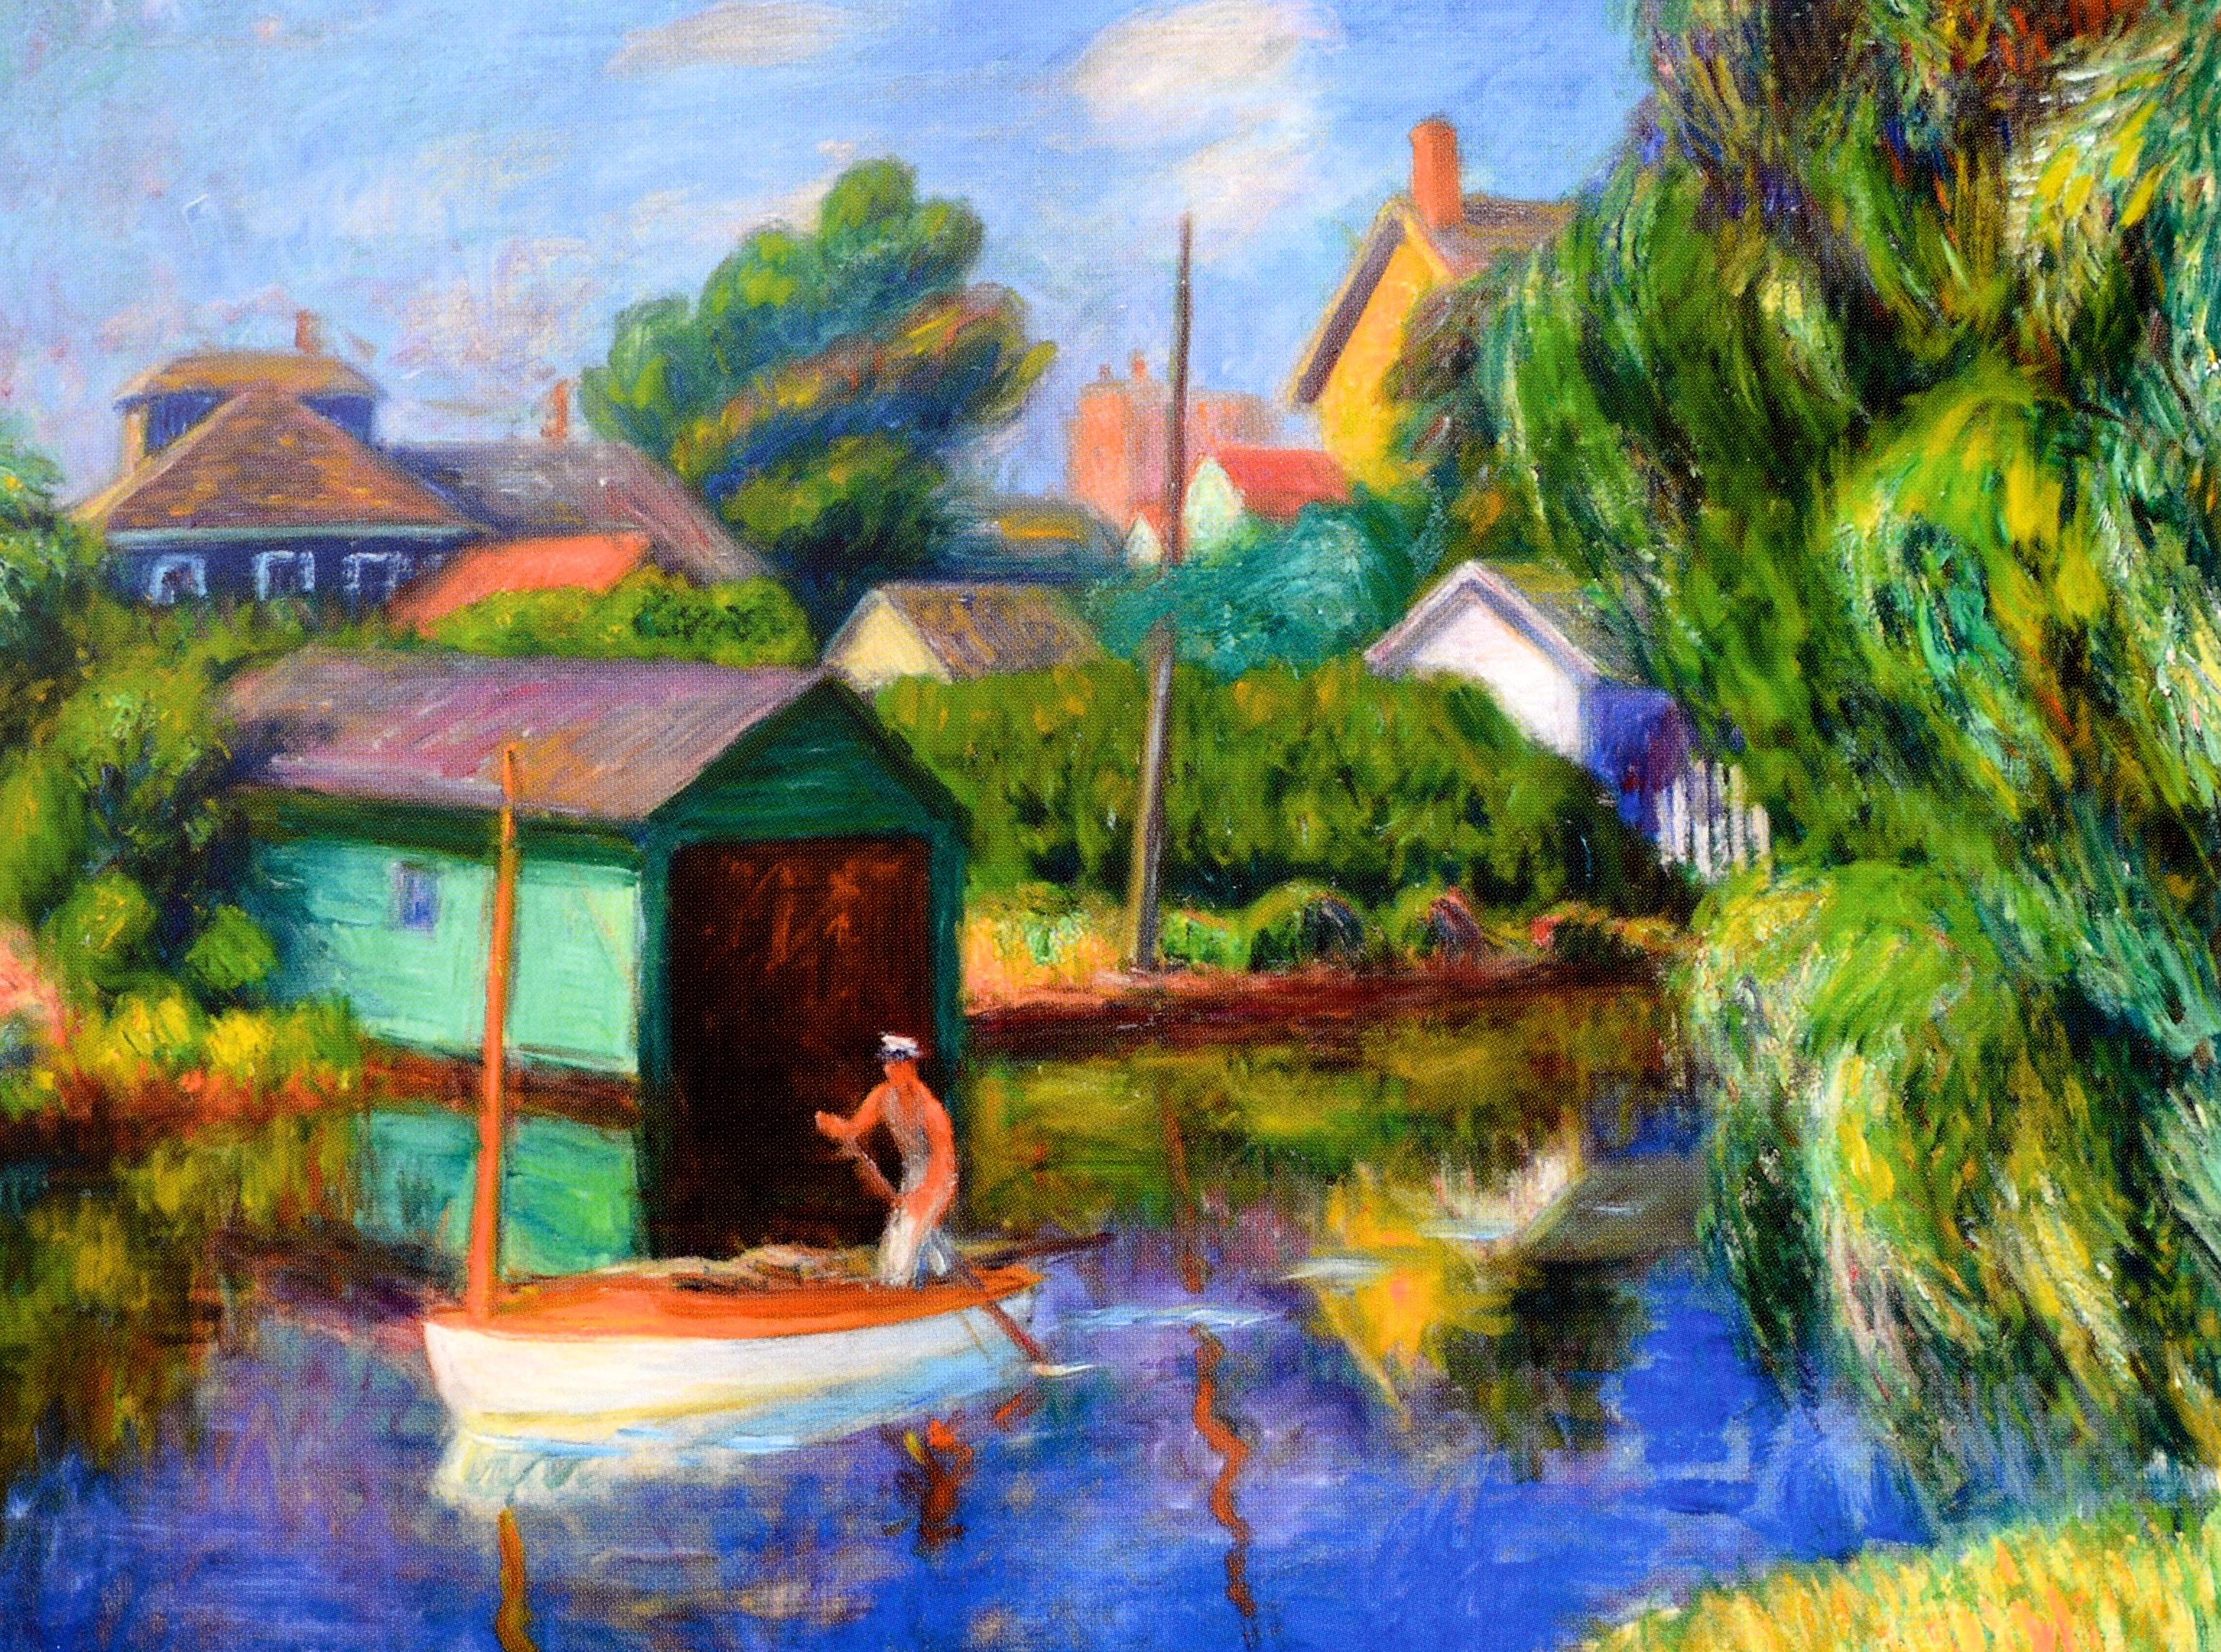 On Brewster's Creek: Views of Bay Shore, Long Island by William Glackens, by Geoffrey K. Fleming. Huntington Museum of Art, 2017. Stated 1st Ed hardcover with dust jacket. The book has the paintings that the American artist William Glackens created